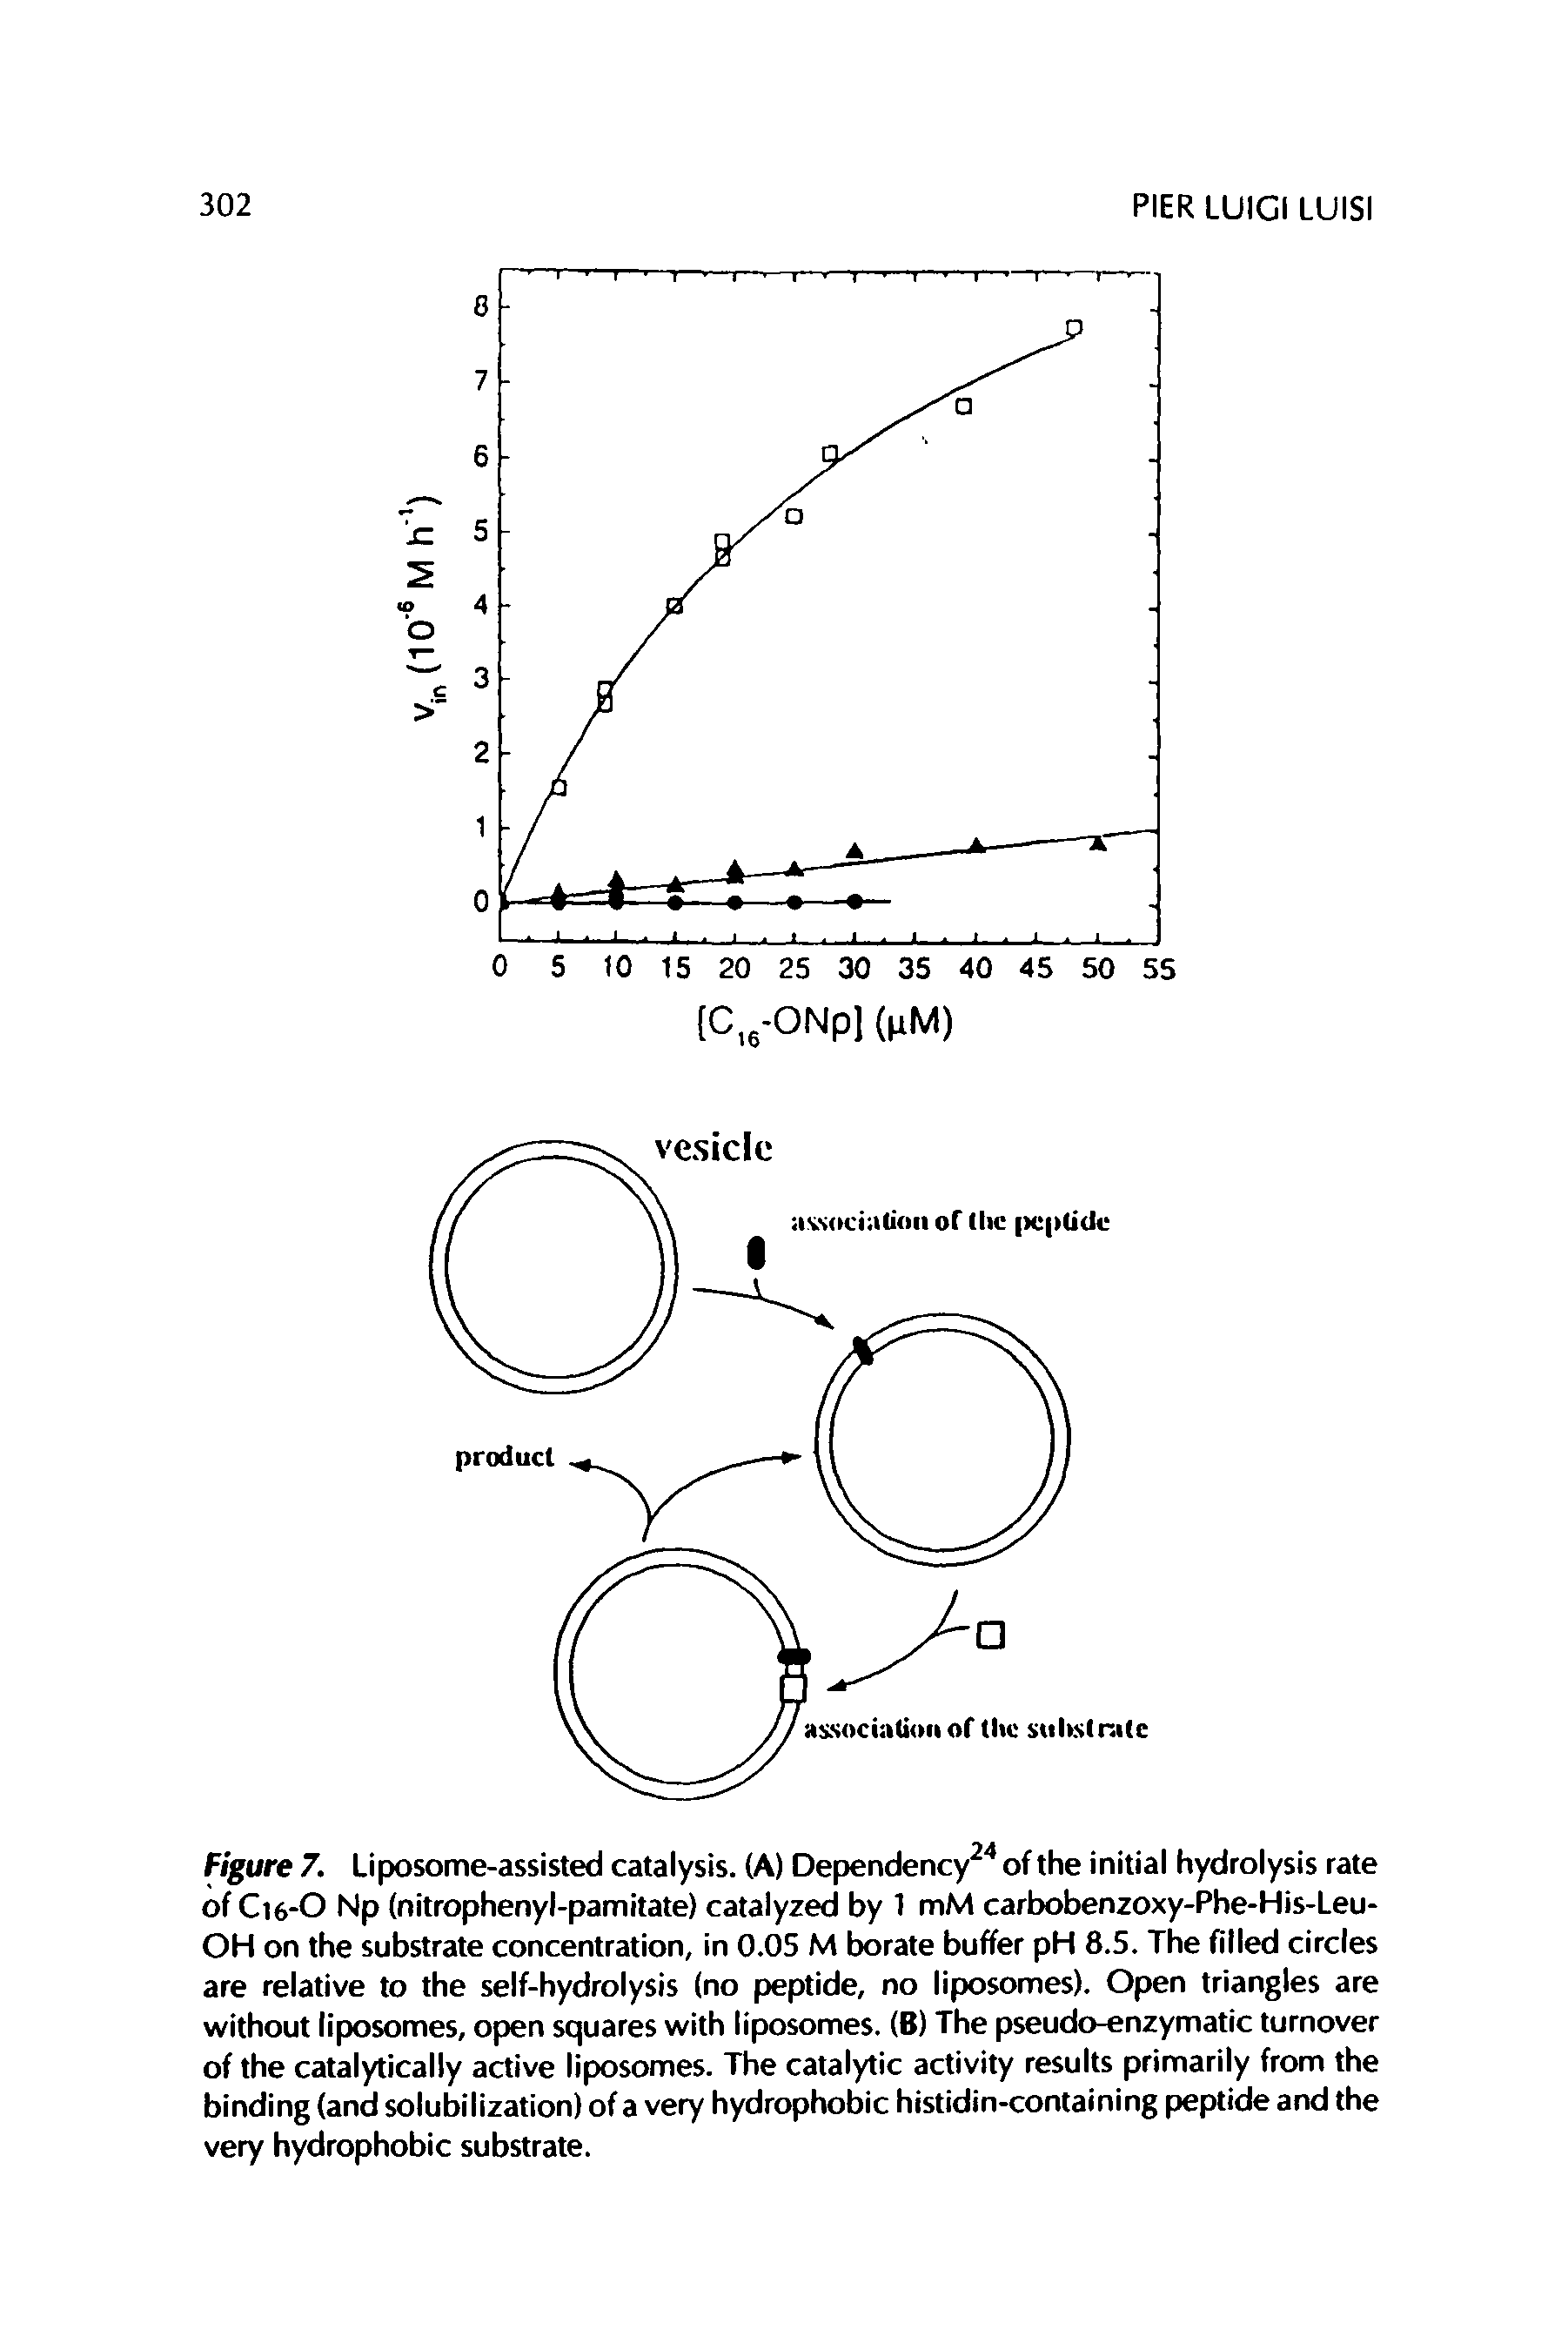 Figure 7. Liposome-assisted catalysis. (A) Dependency of the initial hydrolysis rate of C16-O Np (nitrophenyl-pamitate) catalyzed by 1 mM carbobenzoxy-Phe-His-Leu-OH on the substrate concentration, in 0.05 M borate buffer pH 8.5. The filled circles are relative to the self-hydrolysis (no peptide, no liposomes). Open triangles are without liposomes, open squares with liposomes. (B) The pseudo-enzymatic turnover of the catalytically active liposomes. The catalytic activity results primarily from the binding (and solubilization) of a very hydrophobic histidin-containing peptide and the very hydrophobic substrate.